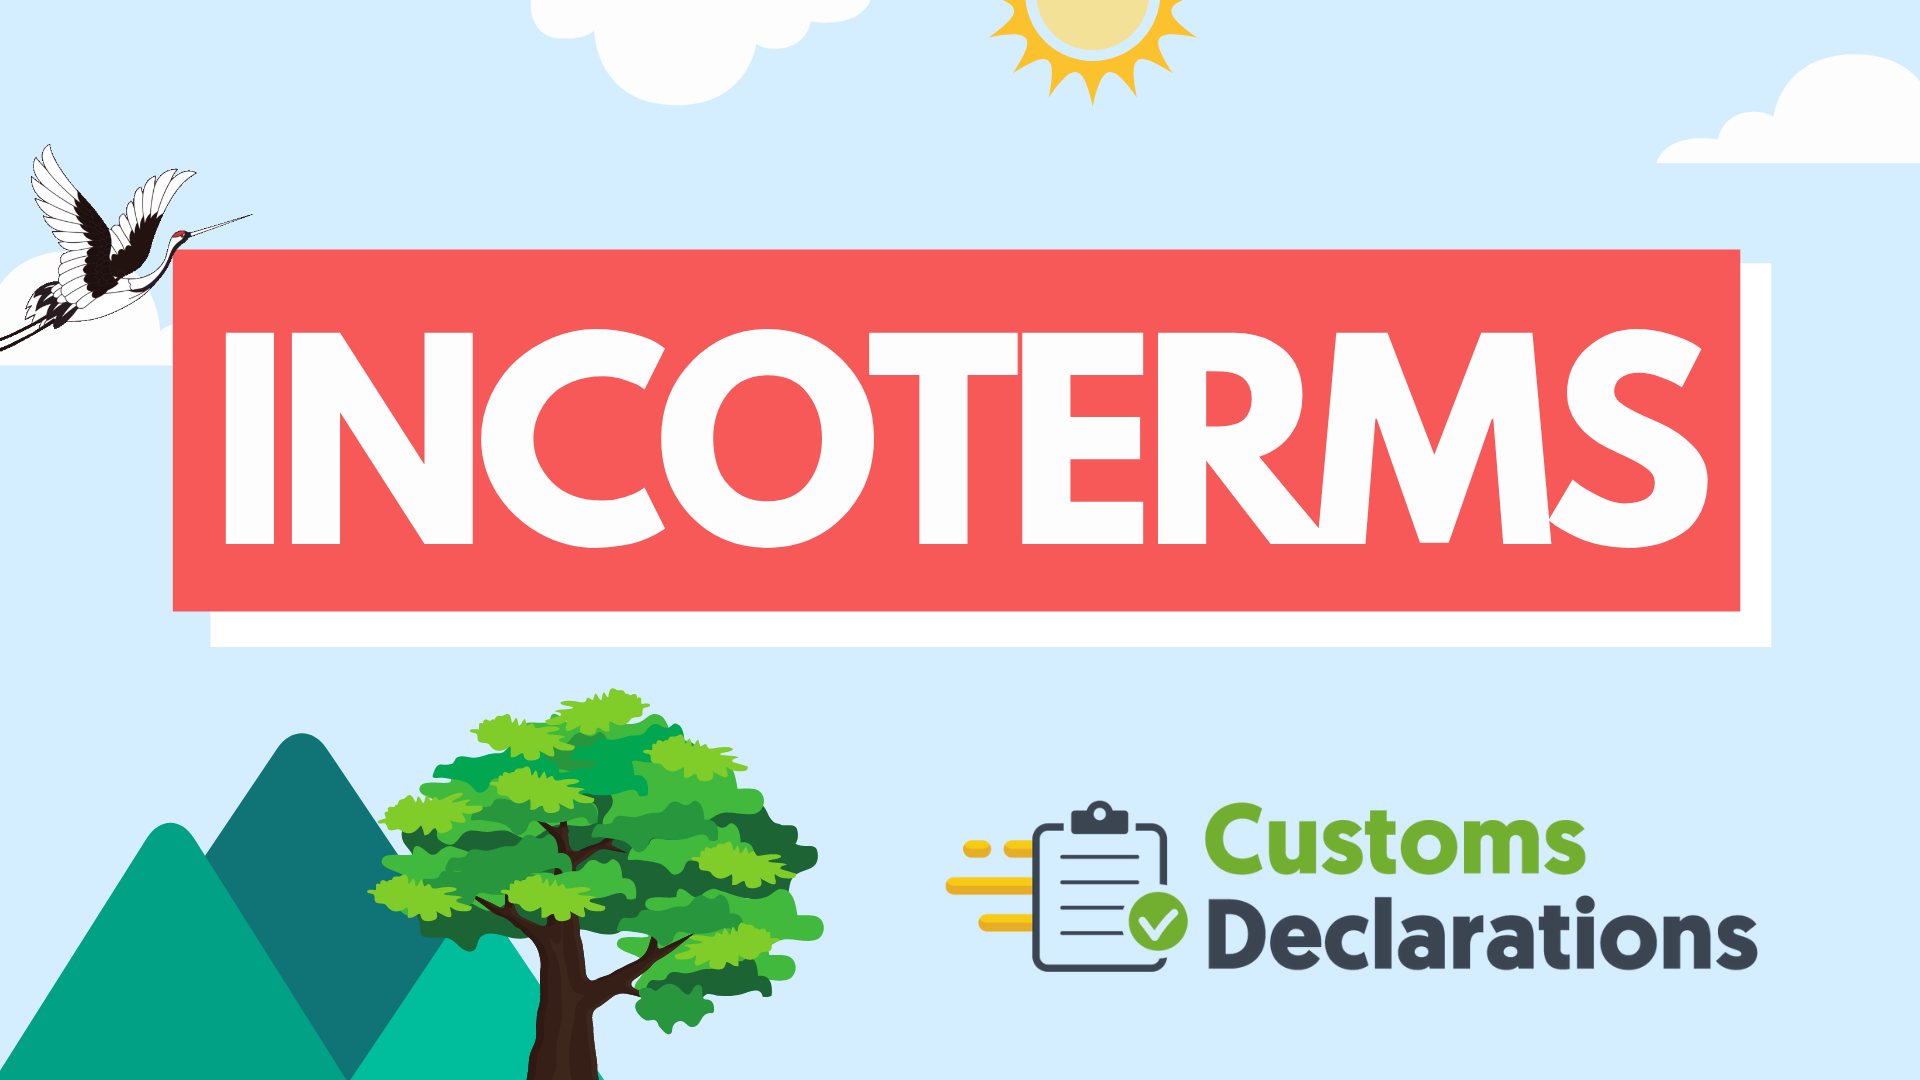 Guide to Incoterms